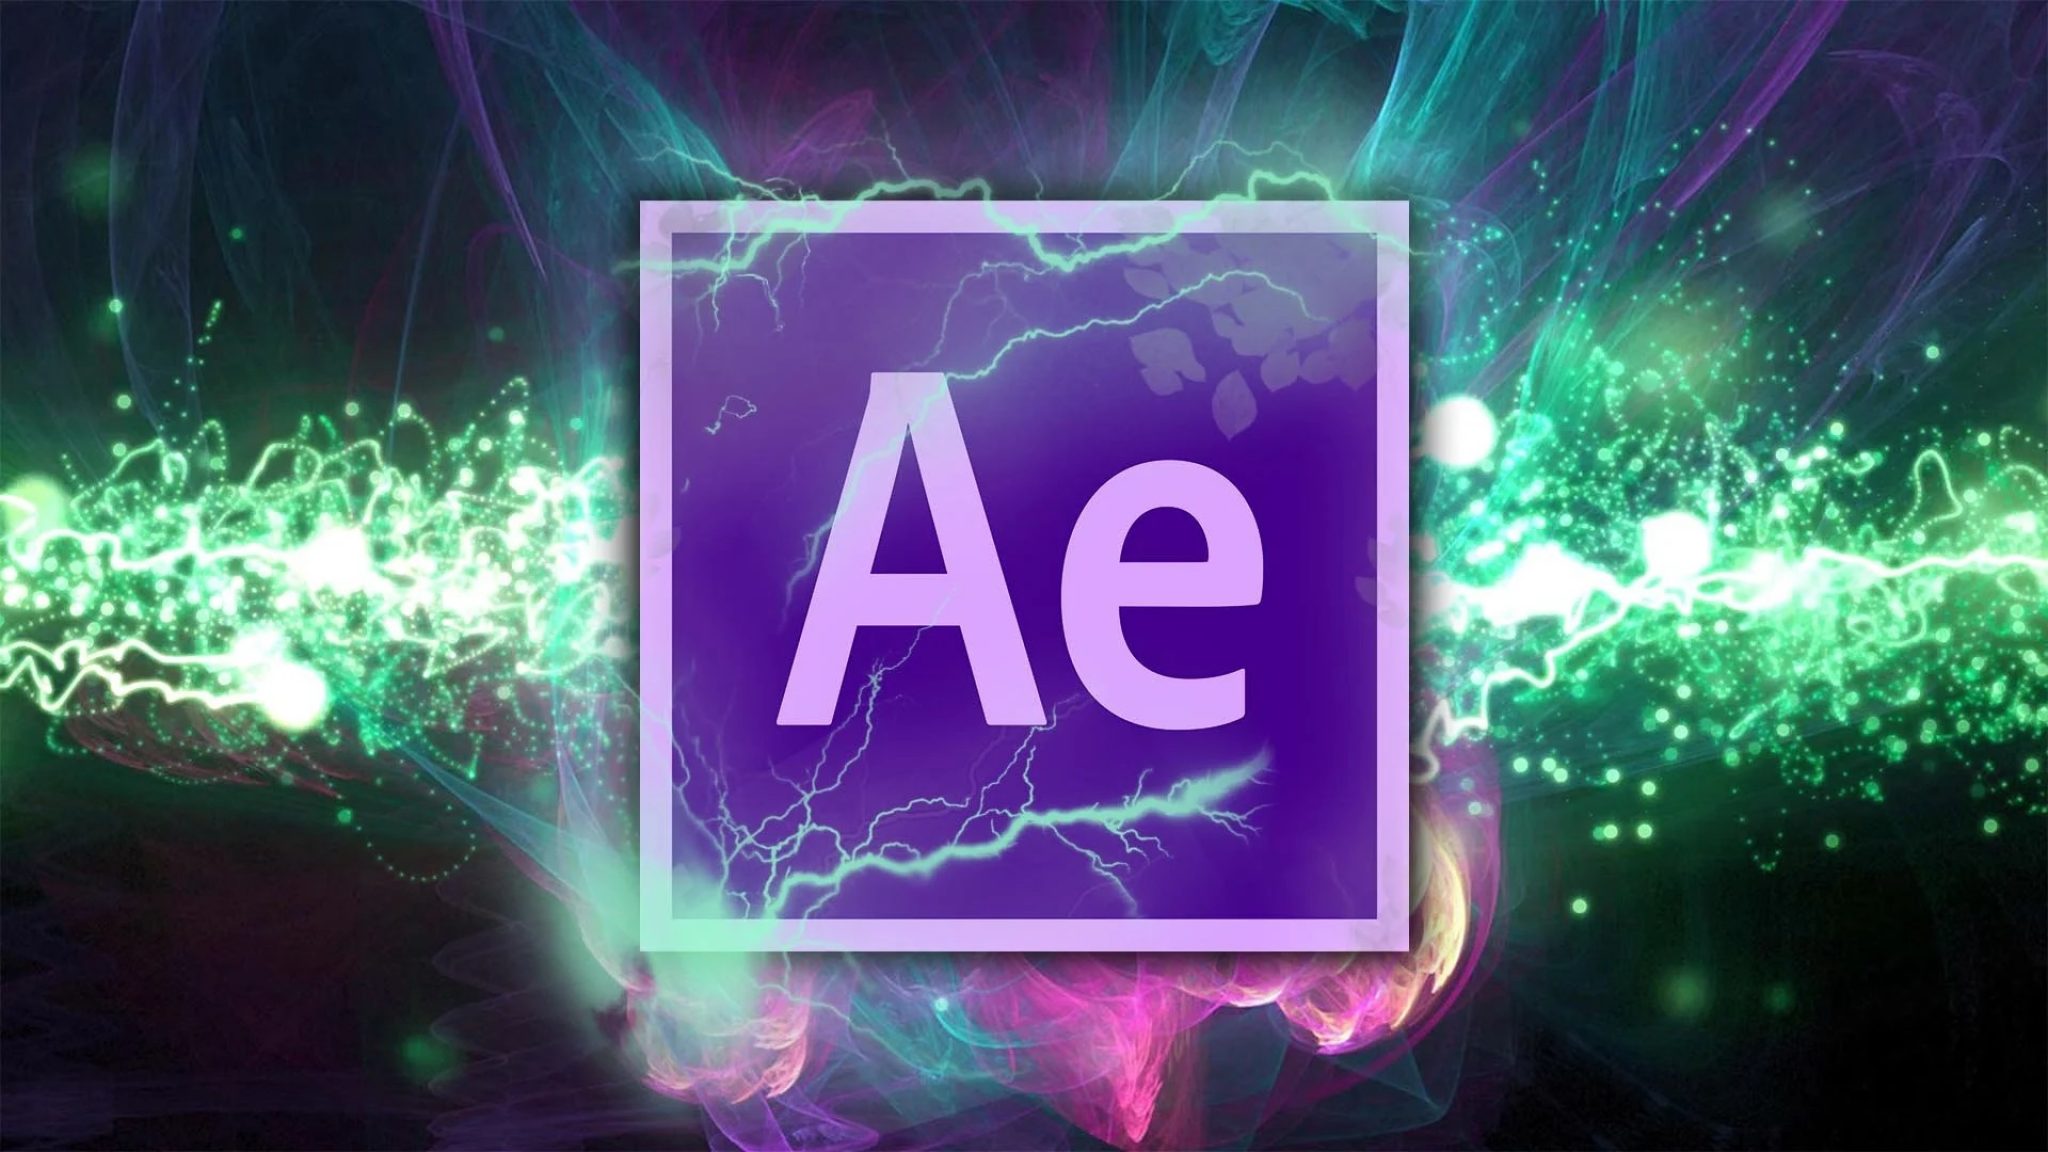 Picture effects. After Effects. Adobe after Effects. Adobe after Effects cc. Адоб Афтер эффект.